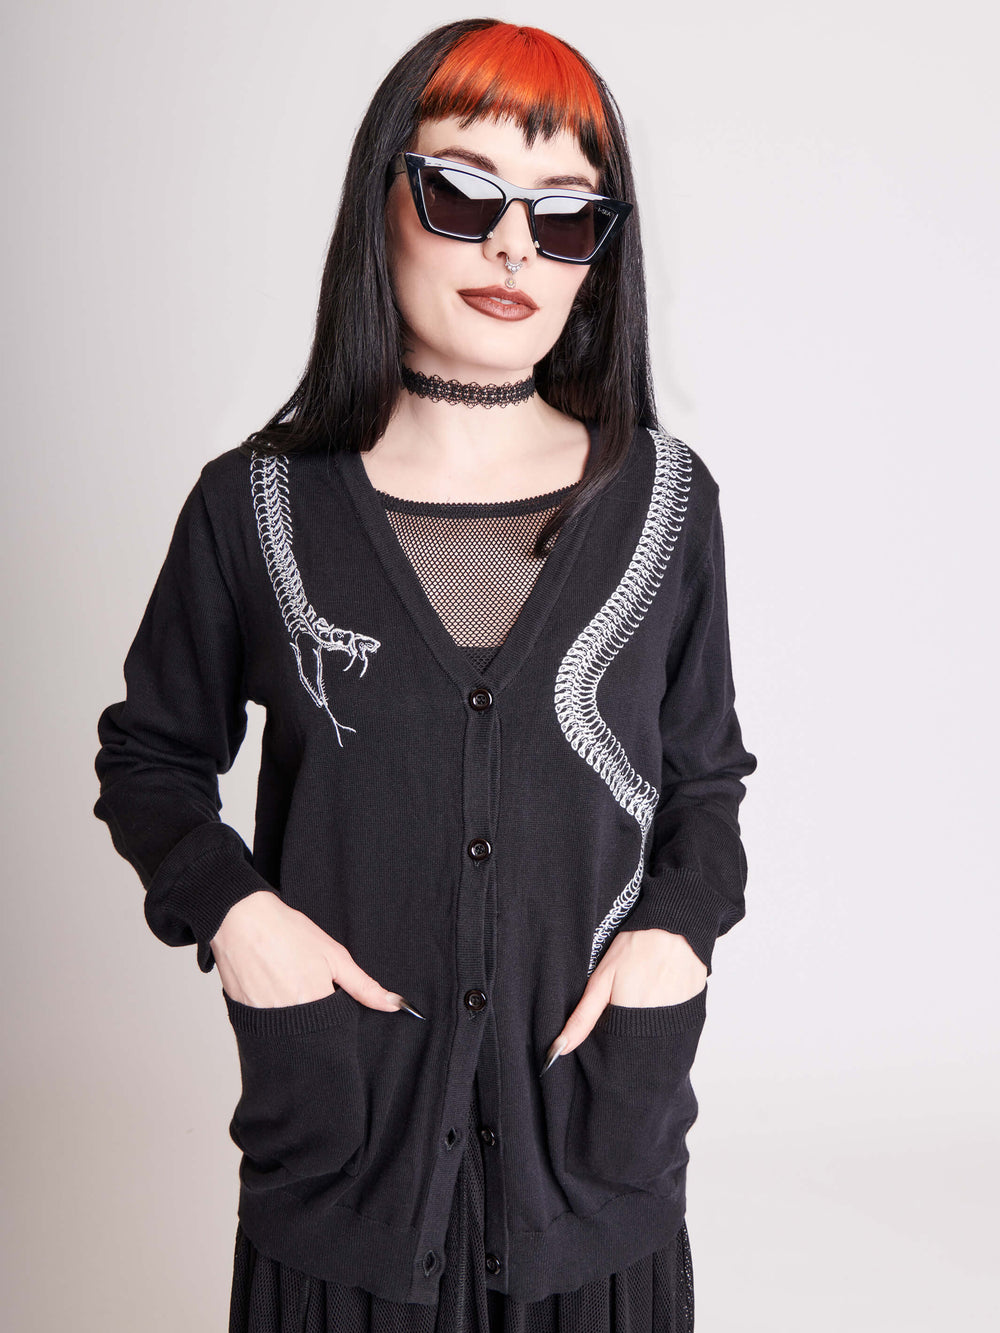 Witchy Clothing | Modern Witchy Outfits & Apparel